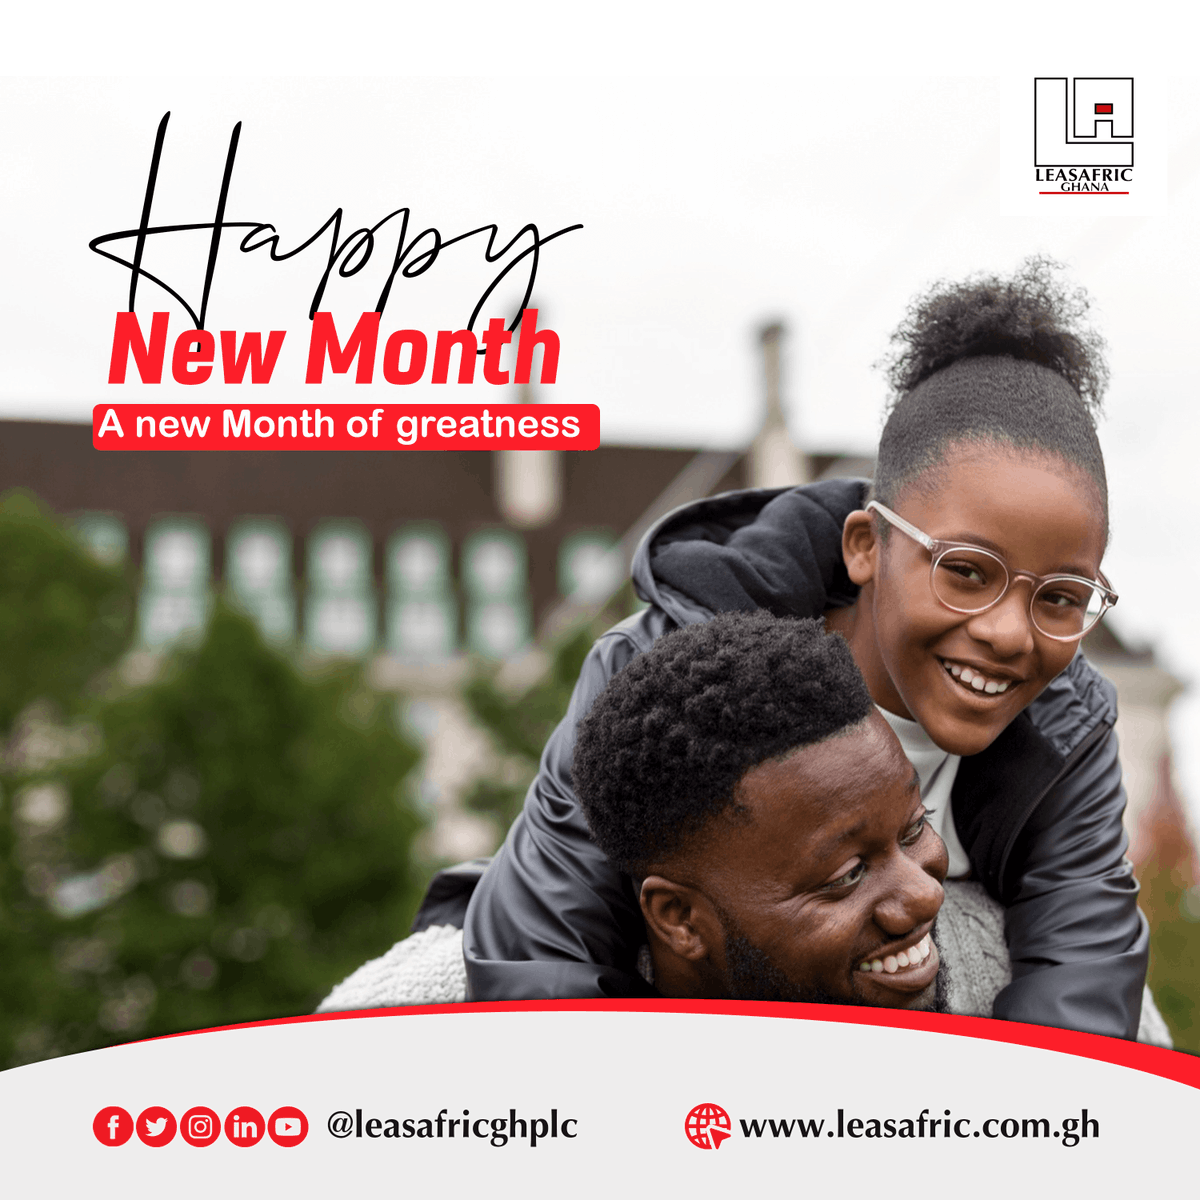 March is here! Jappy New Month from all of us 
Leasafric wishes you a month full of greatness.

#HappyNewMonth #March2Greatness #LeasafricGhana